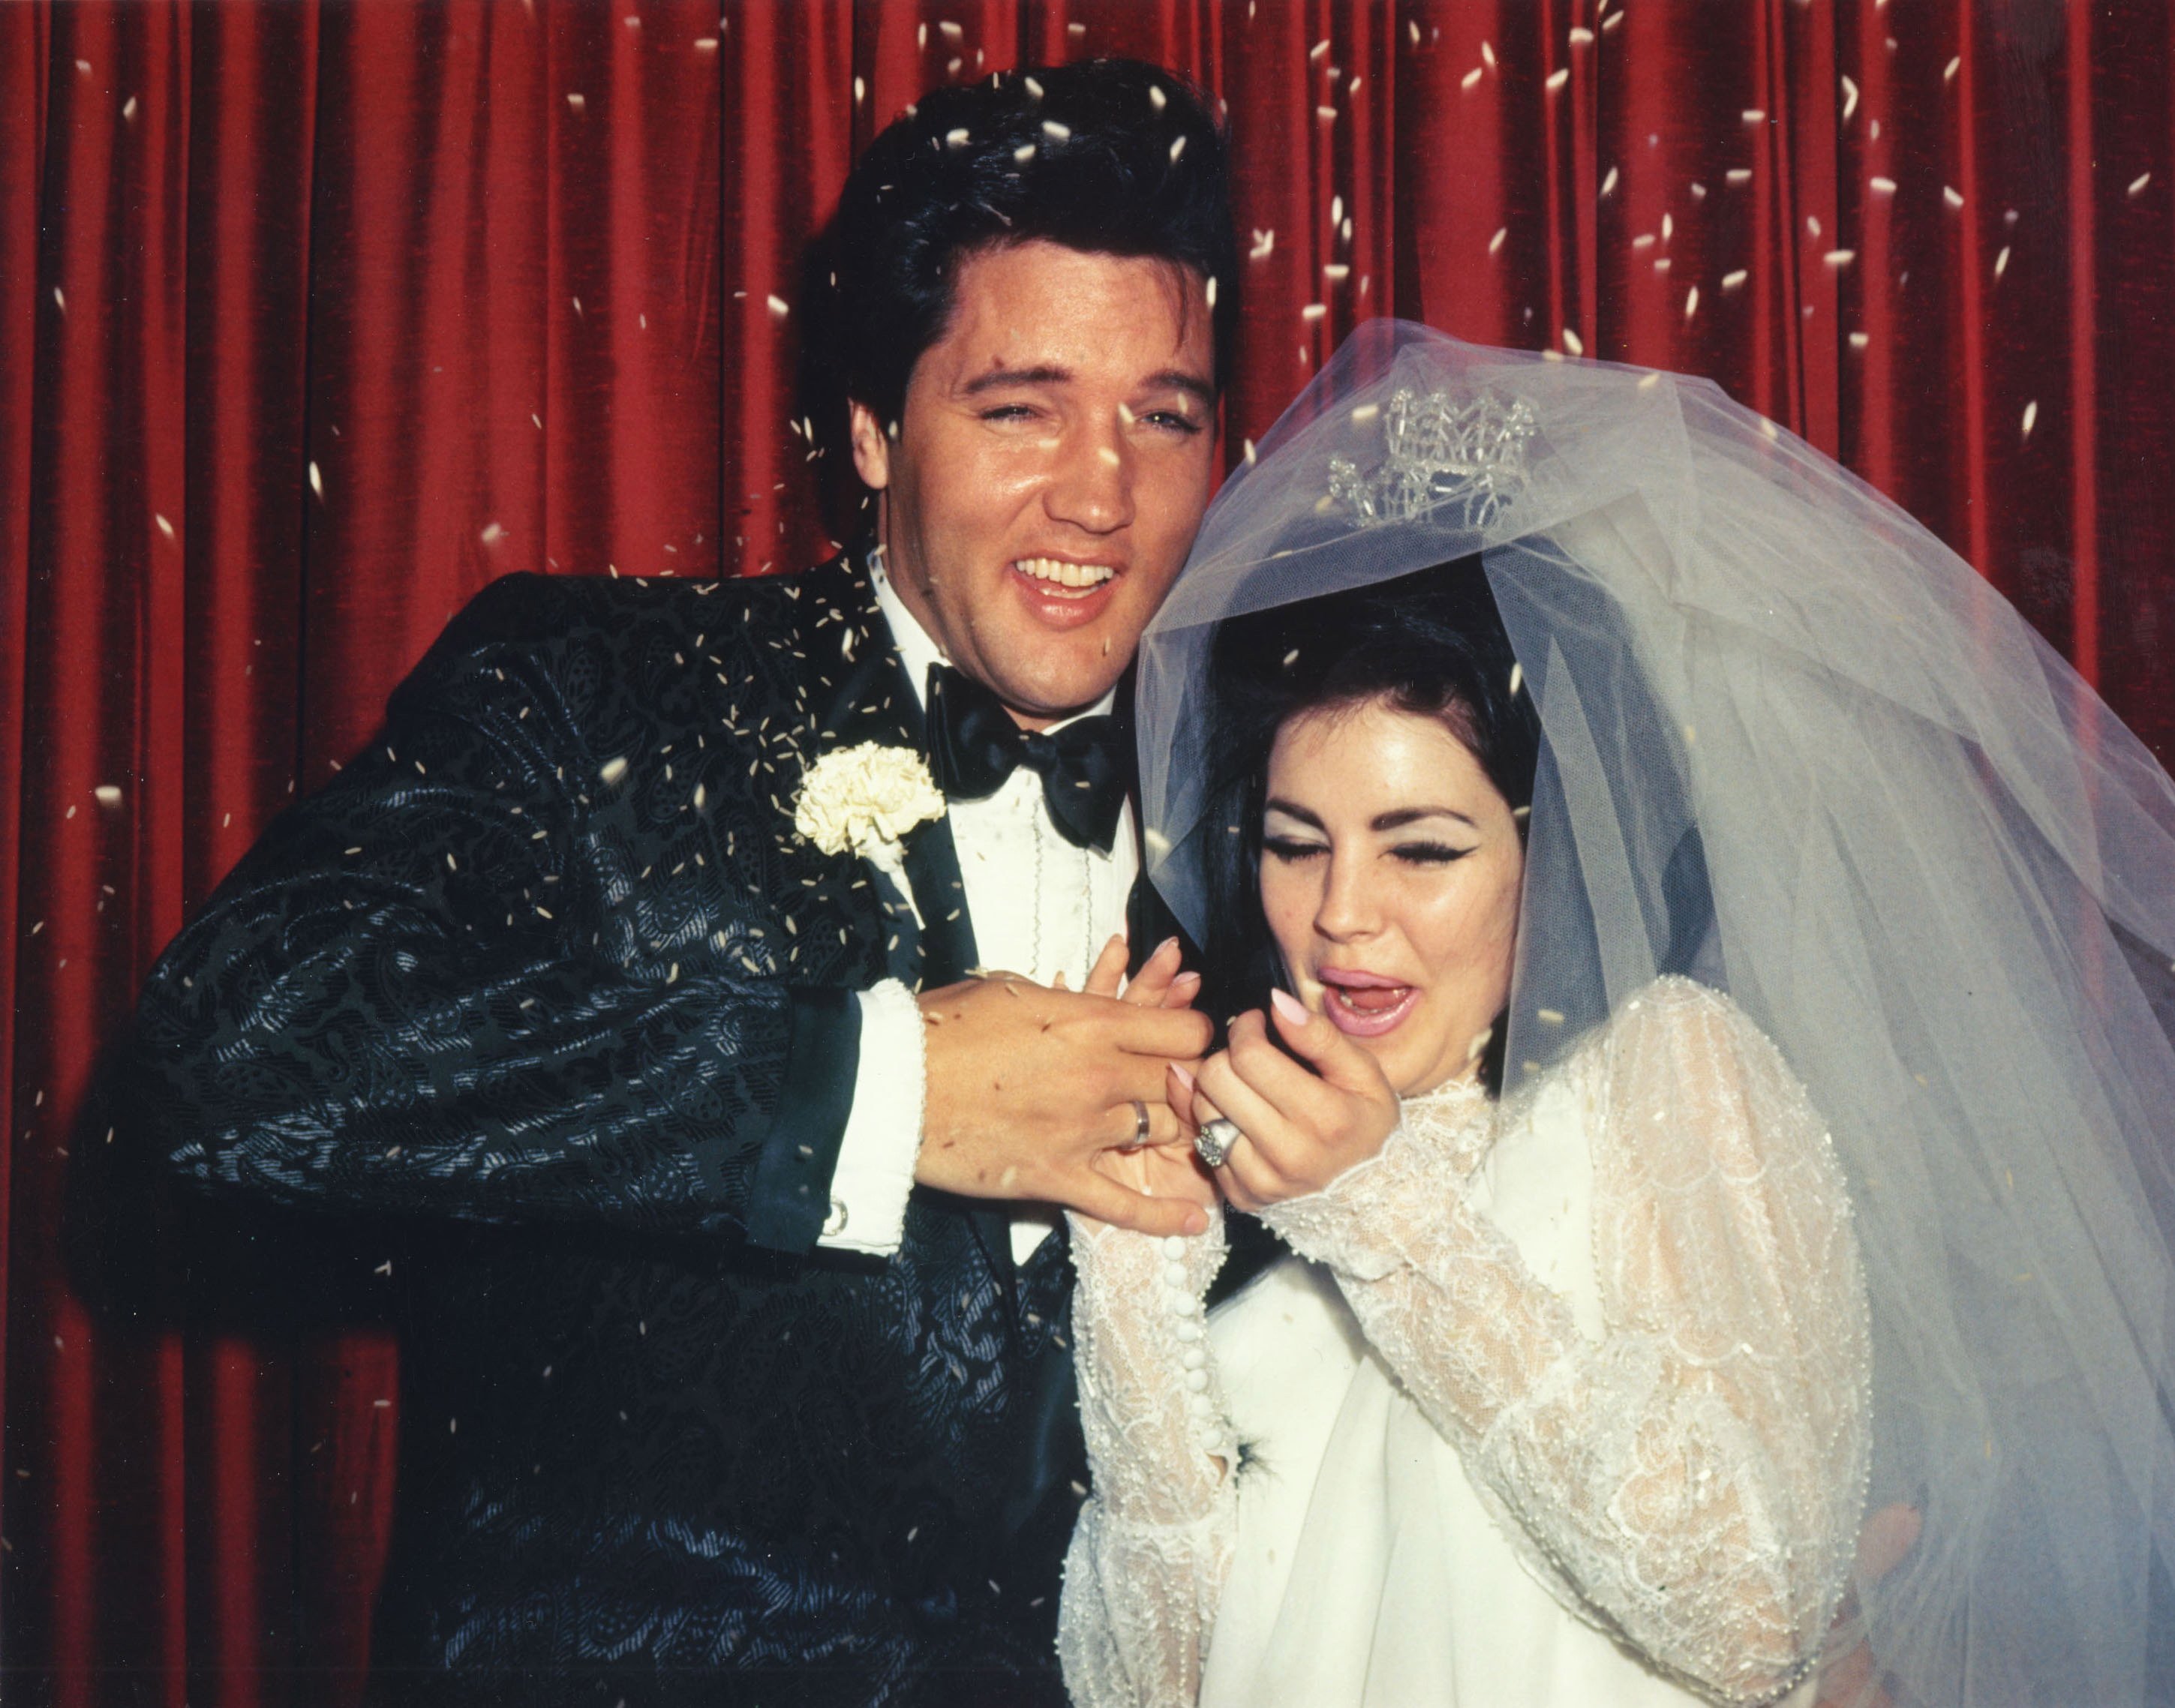 Elvis and Priscilla Presley and a curtain